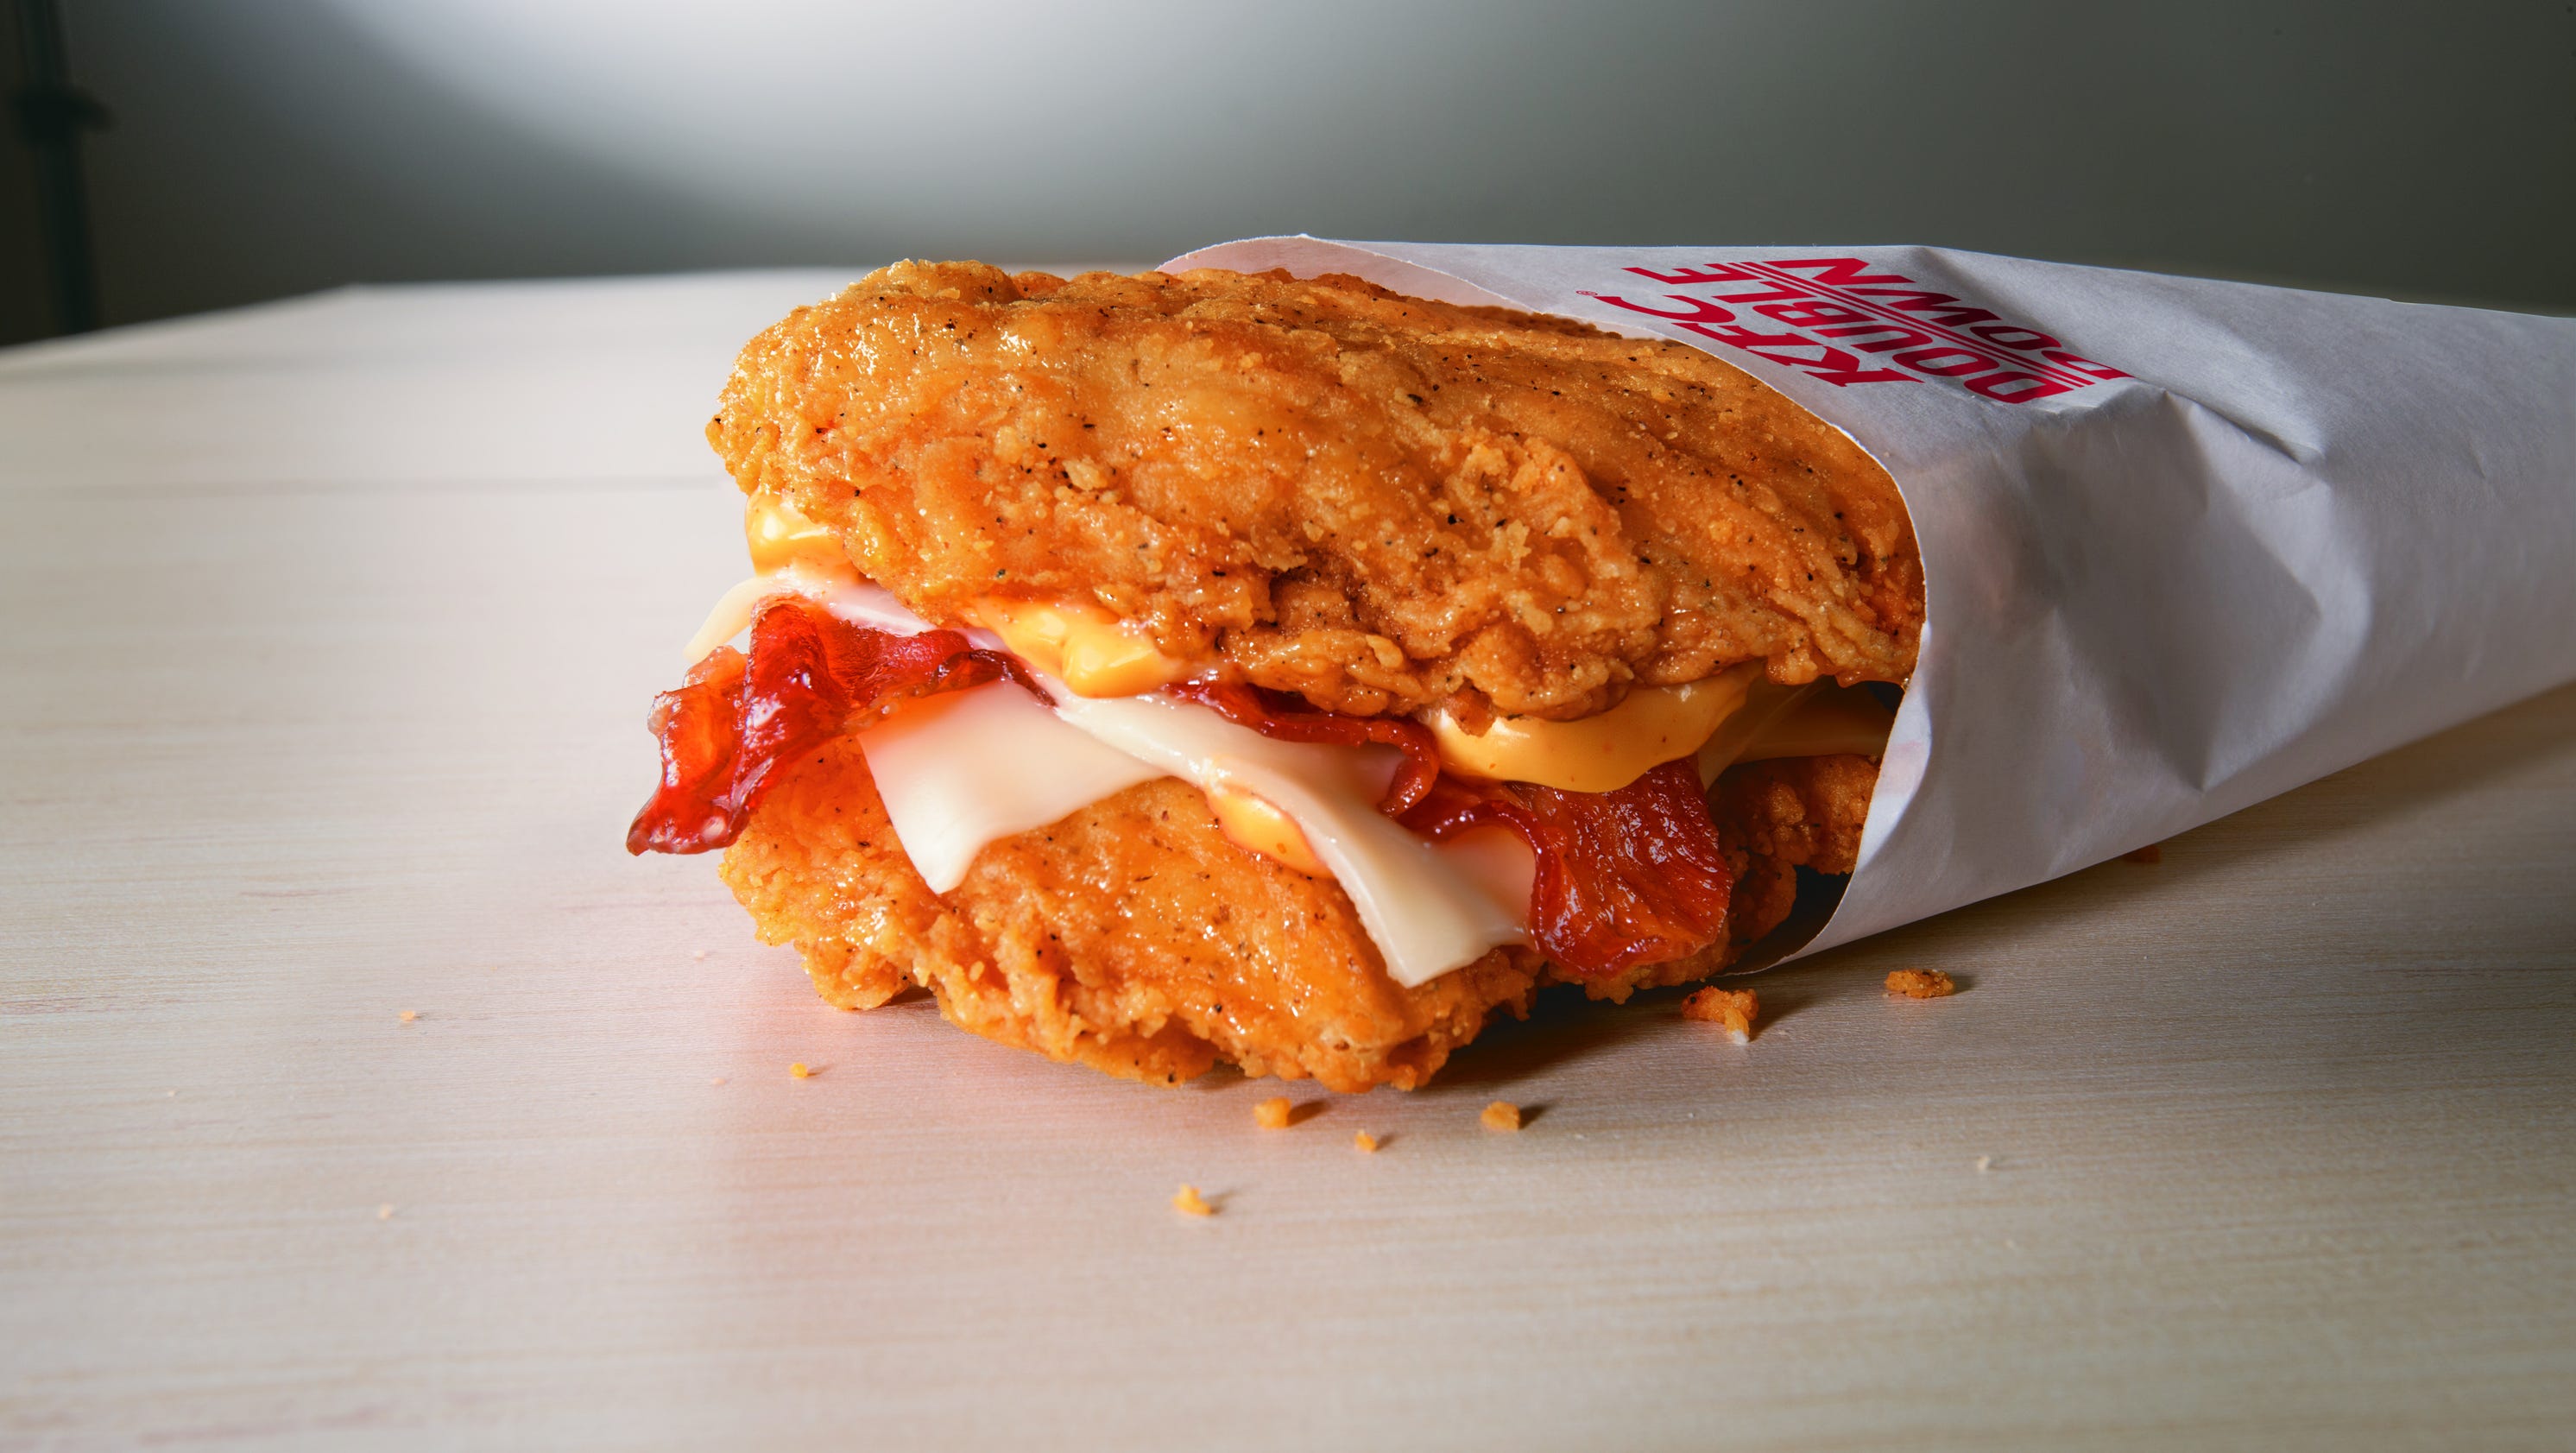 Exclusive KFC brings back the Double Down